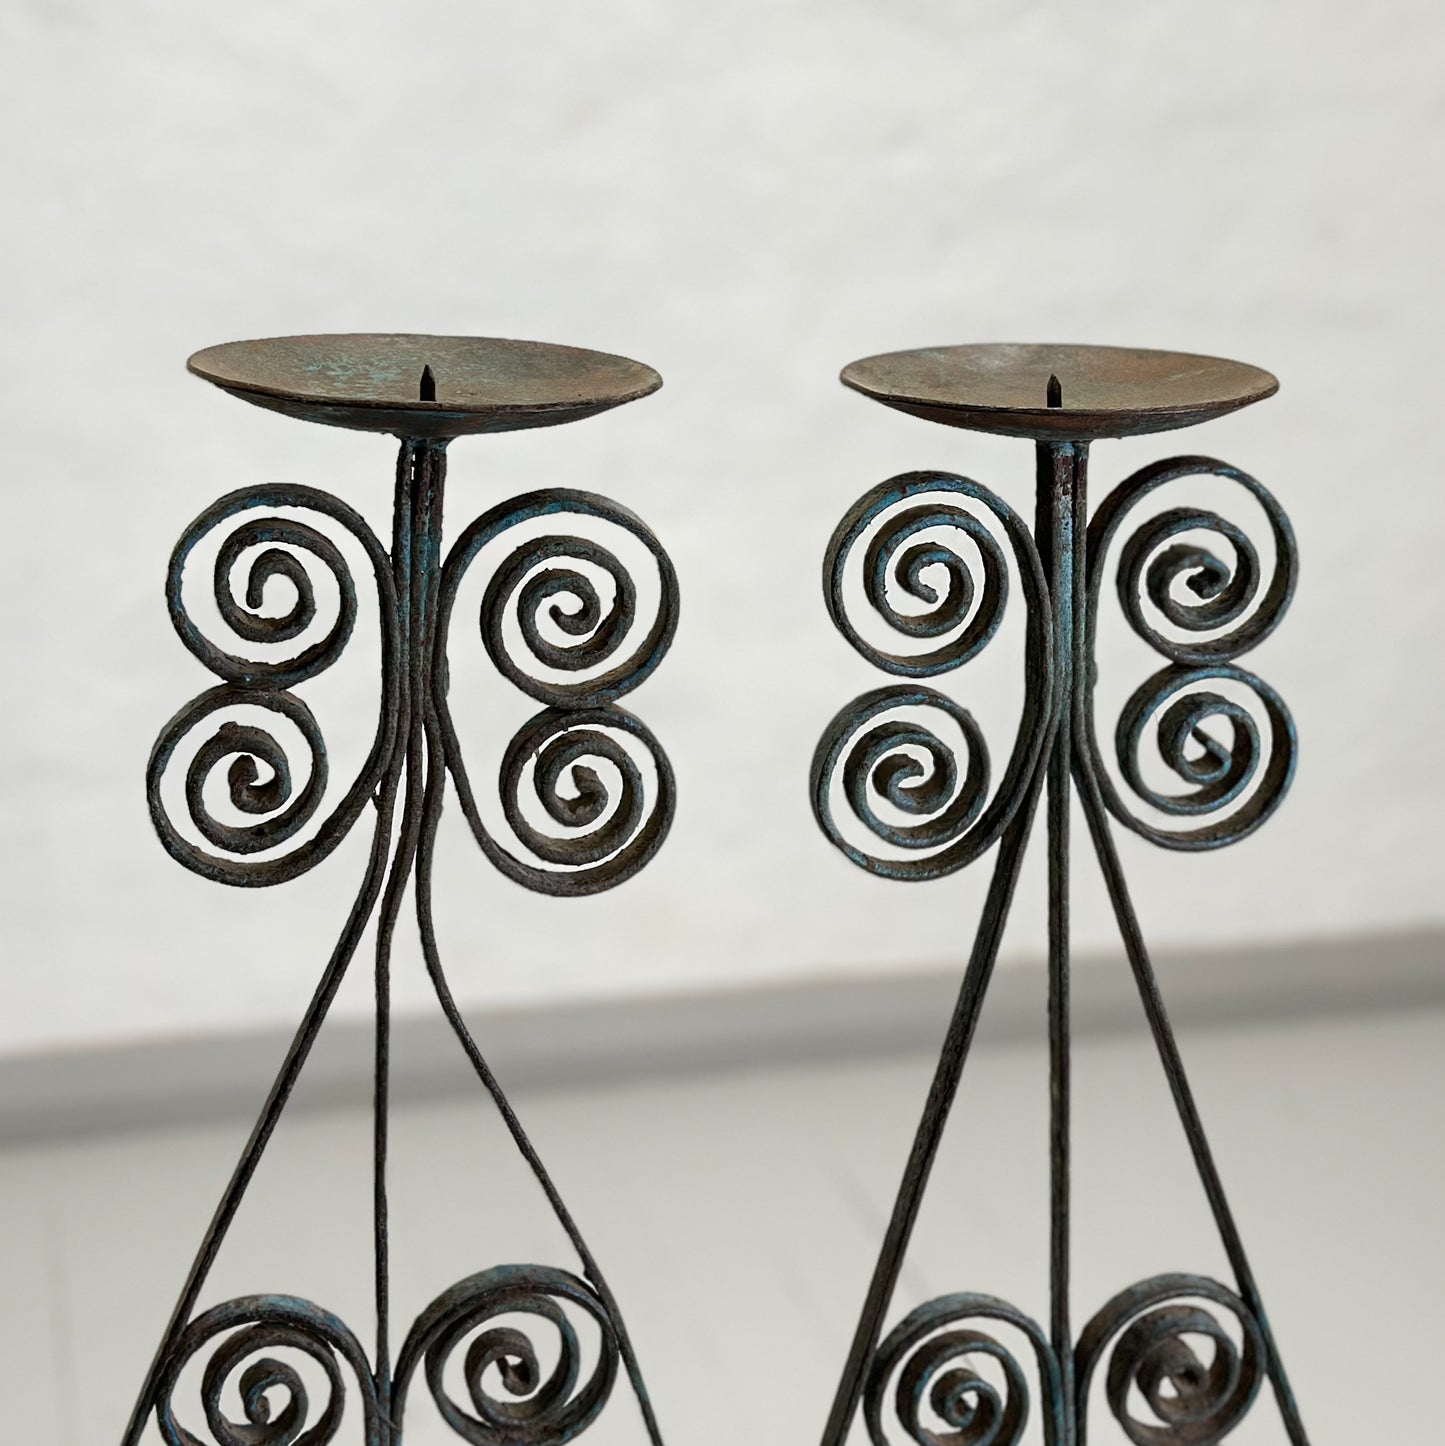 Vintage Wrought Iron Baluster Candle Holder